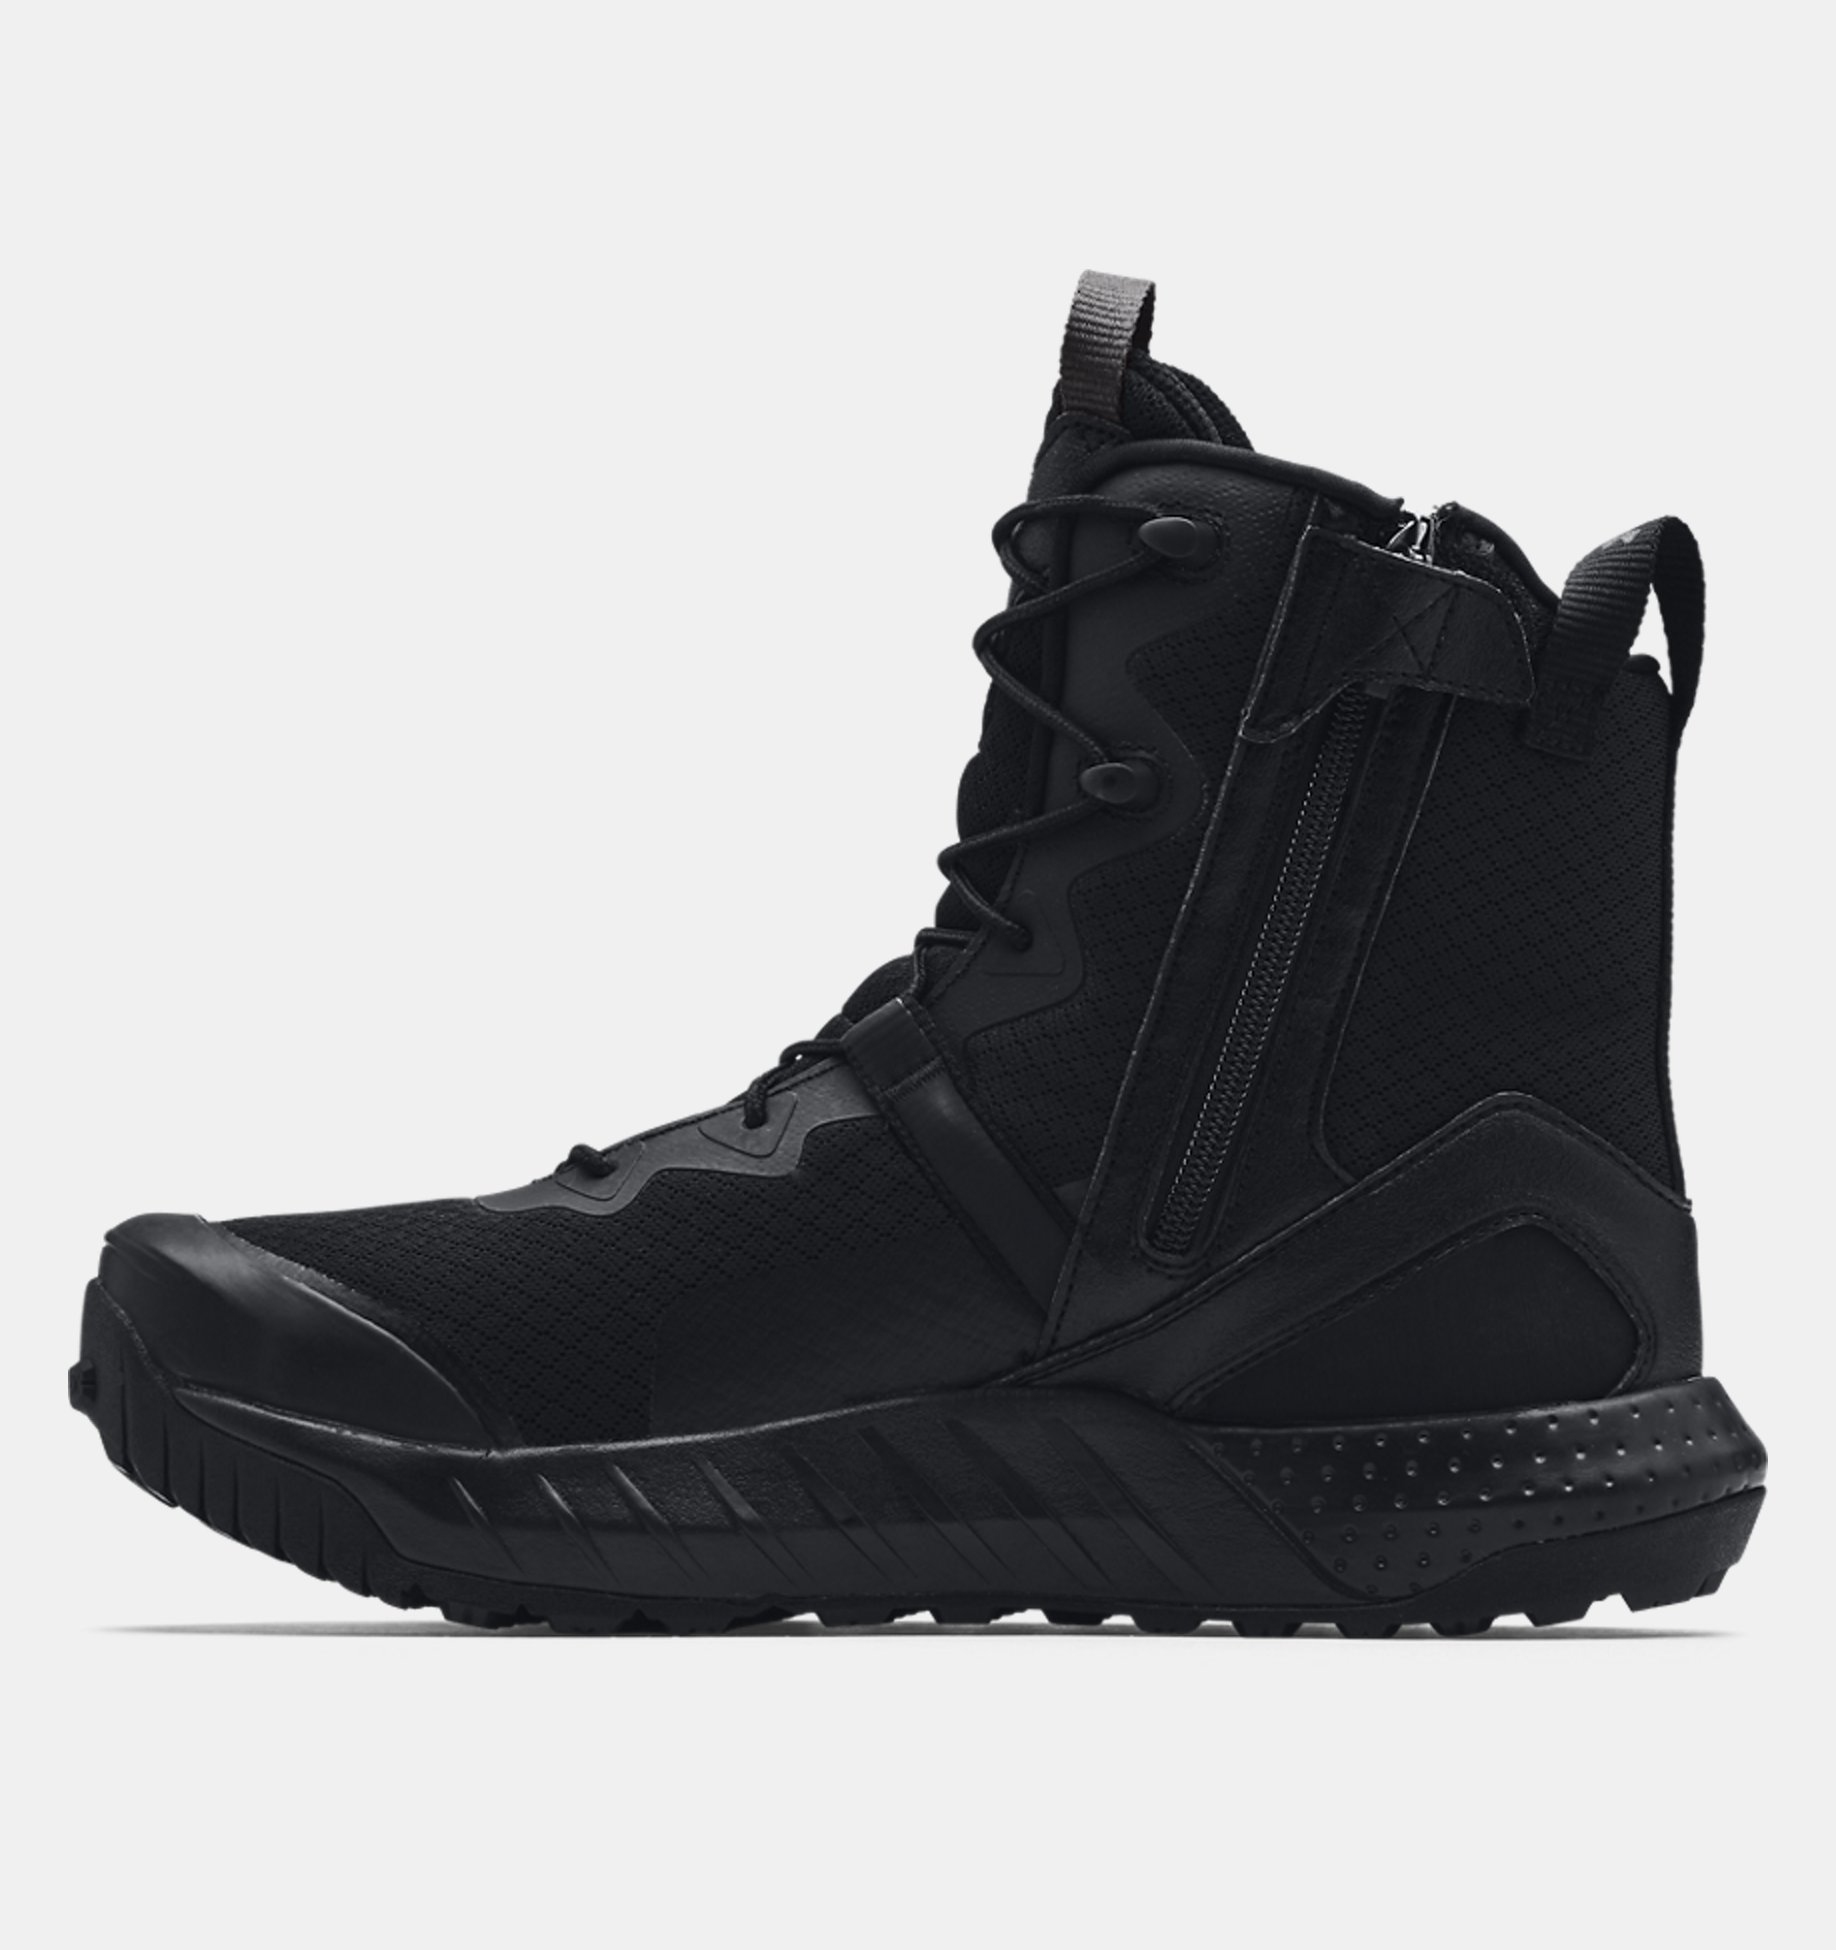 Under Armour Mens Valsetz Military and Tactical Boot 